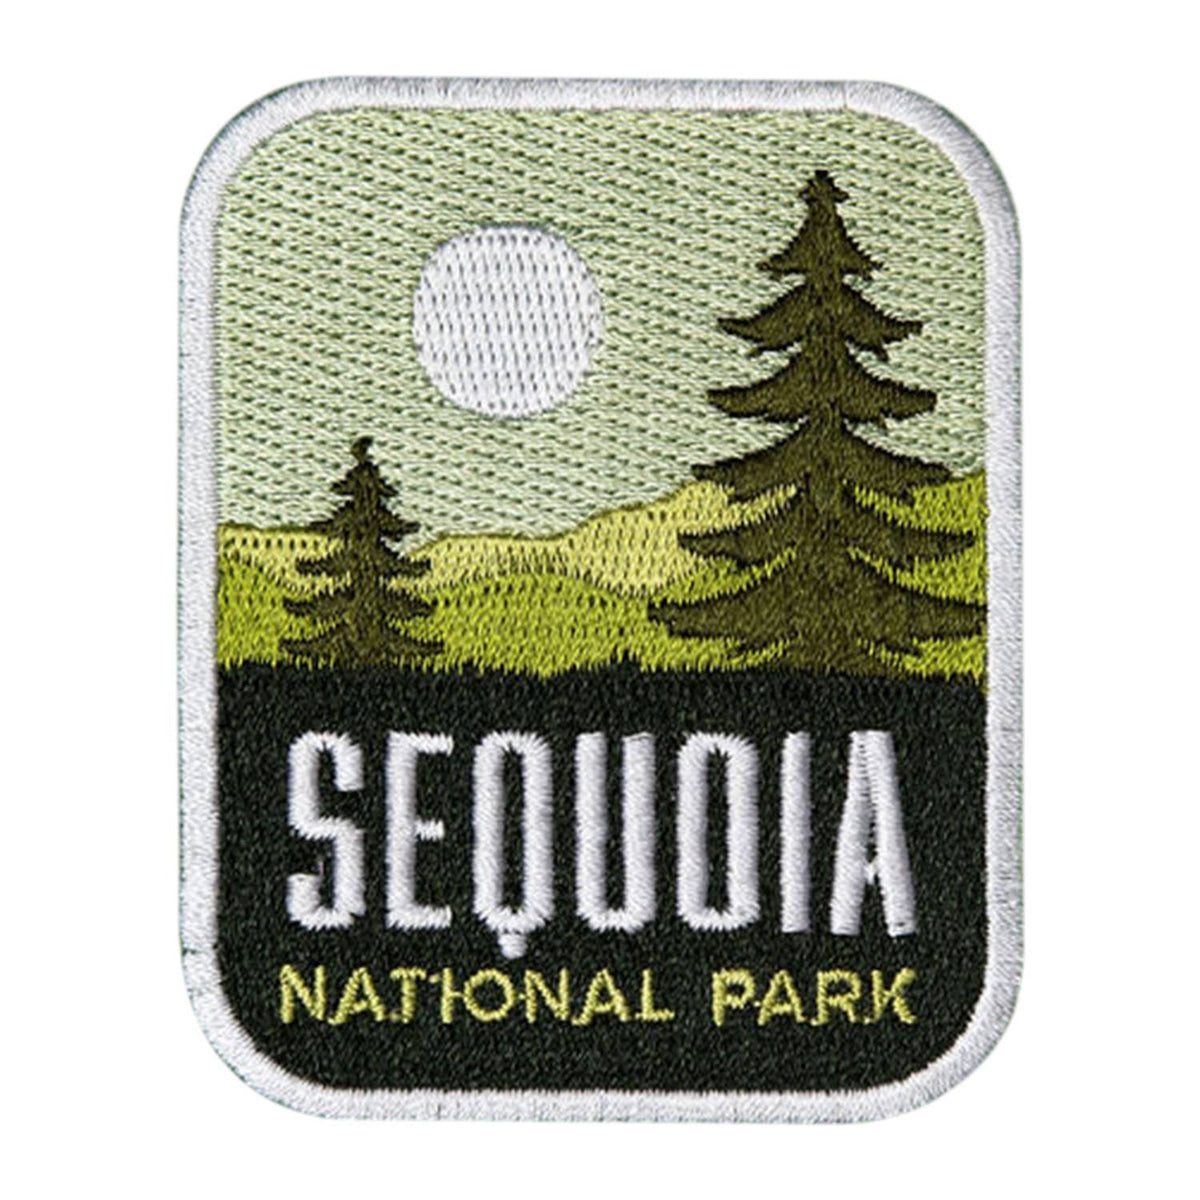 Sequoia National Park Iron-on Patch